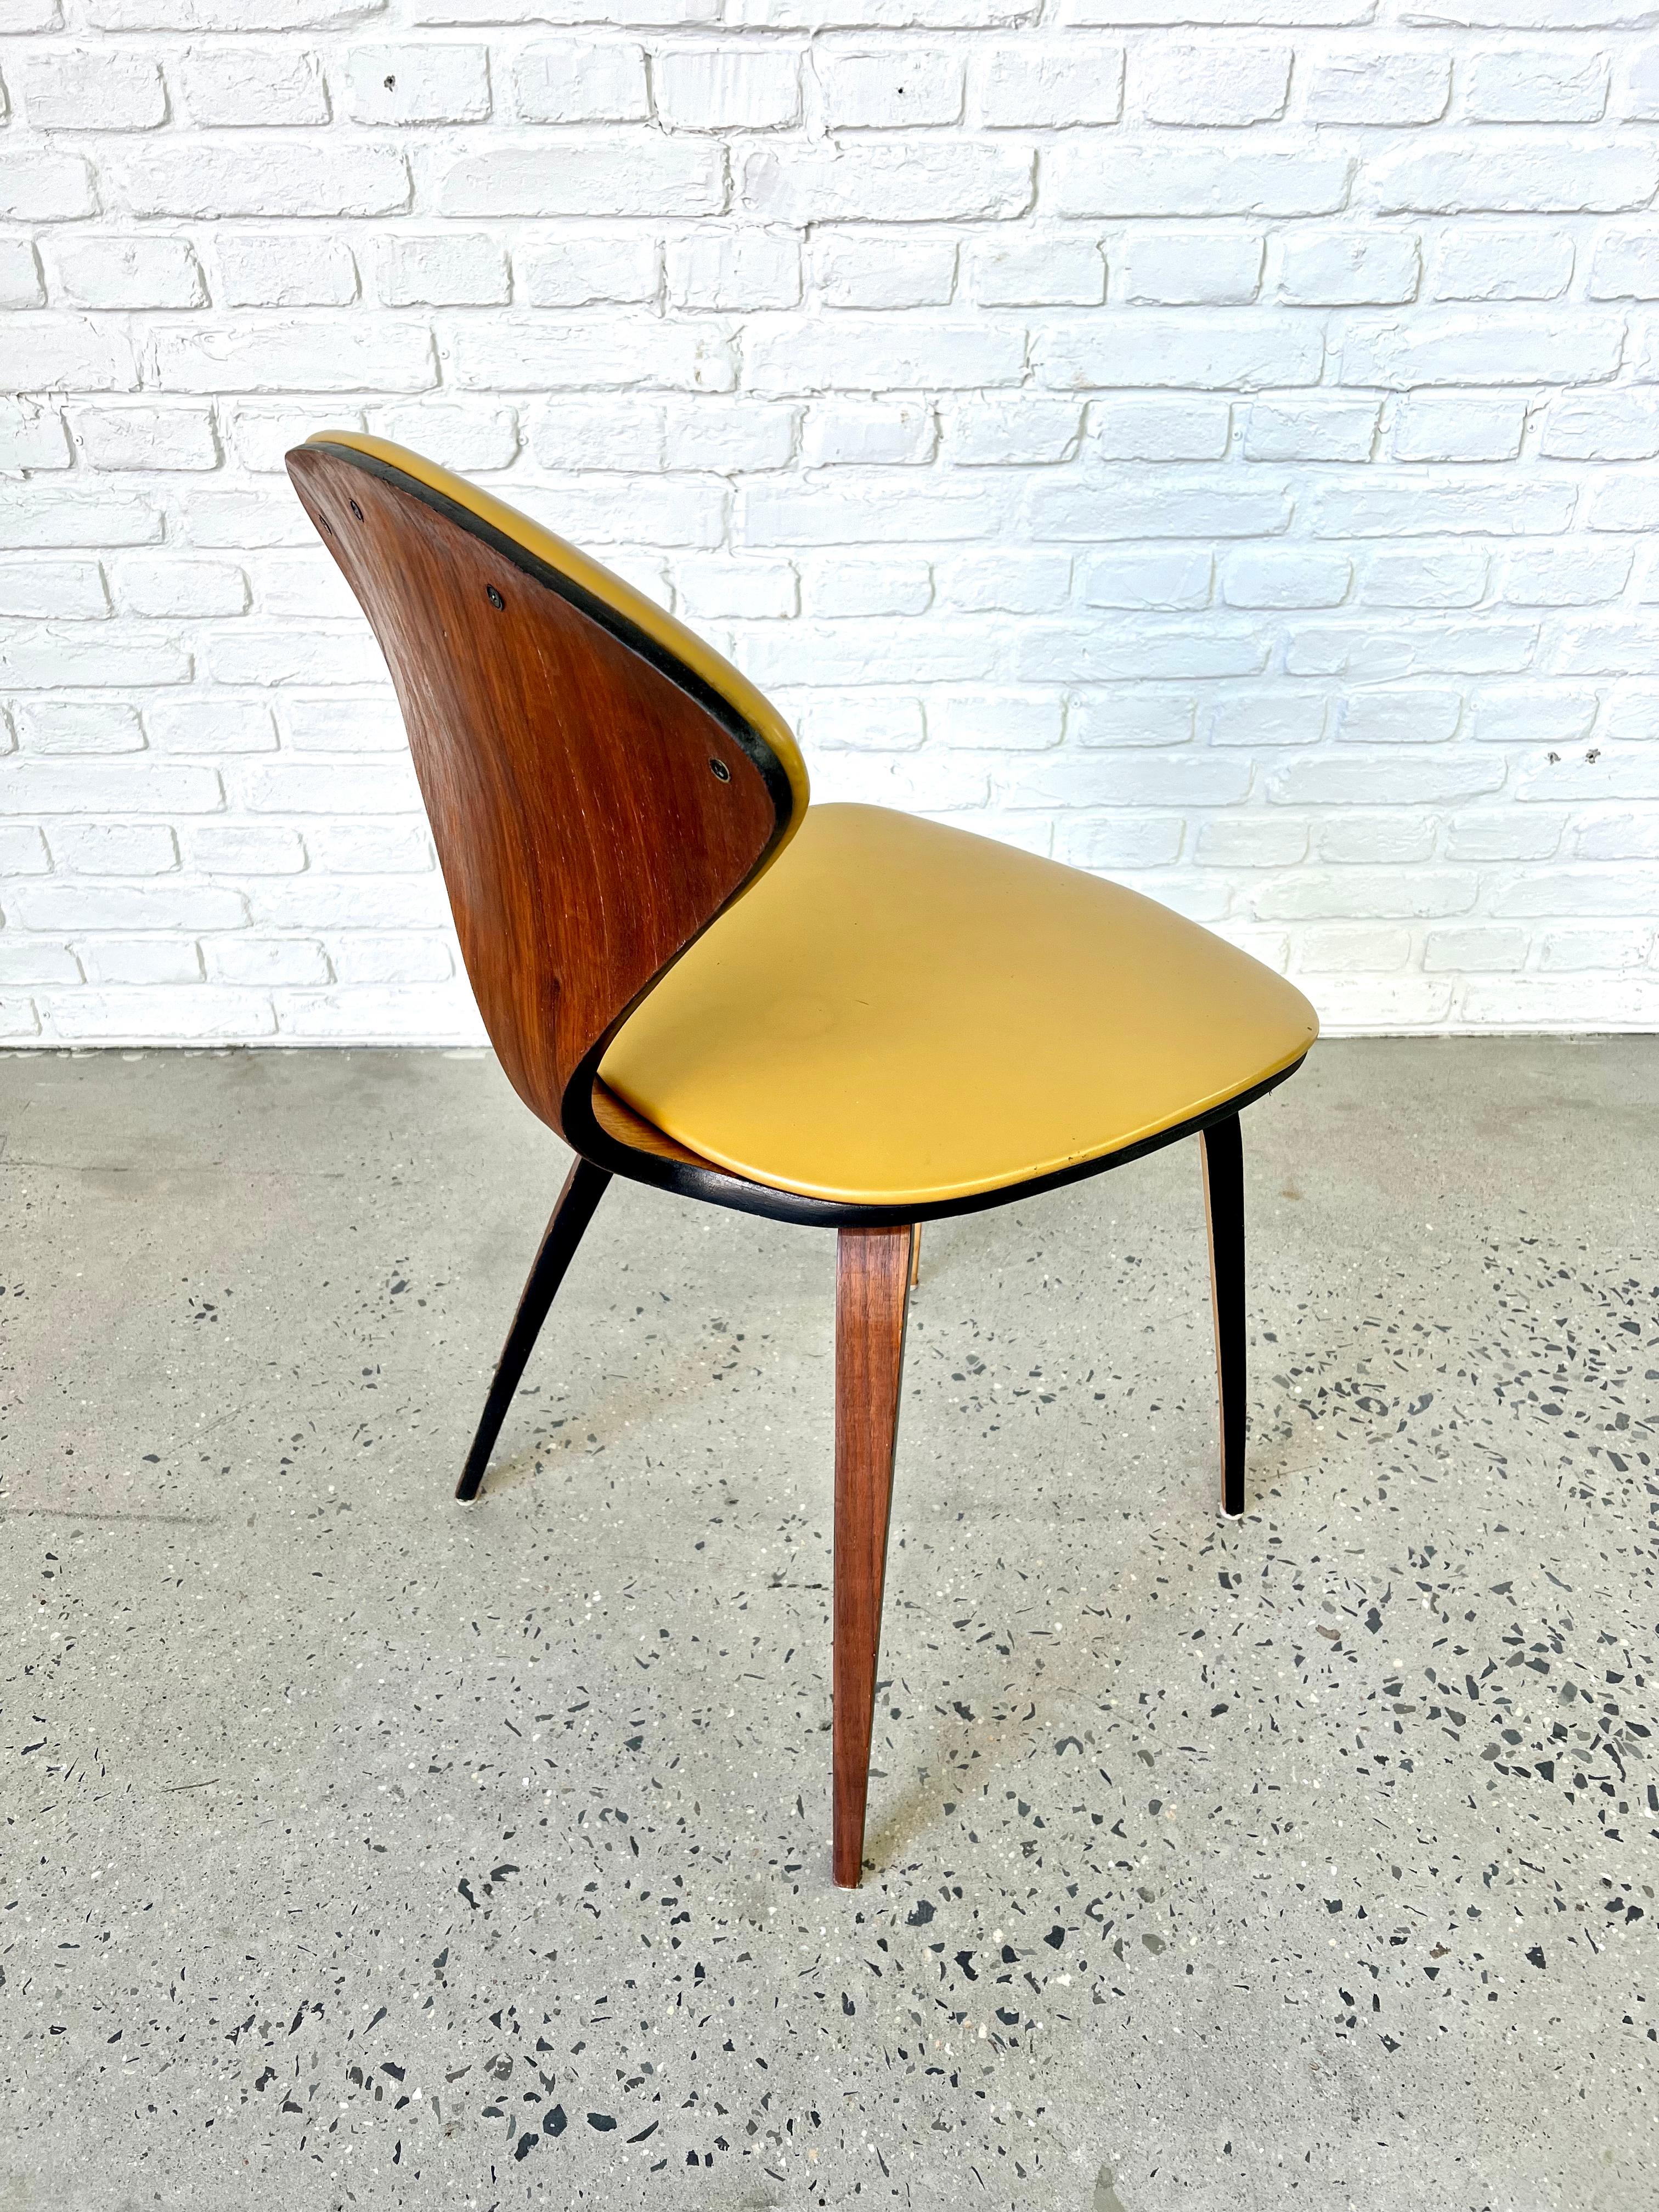 Mid-20th Century Norman Cherner for Plycraft Bentwood chair with Yellow Vinyl cushion 1960s For Sale